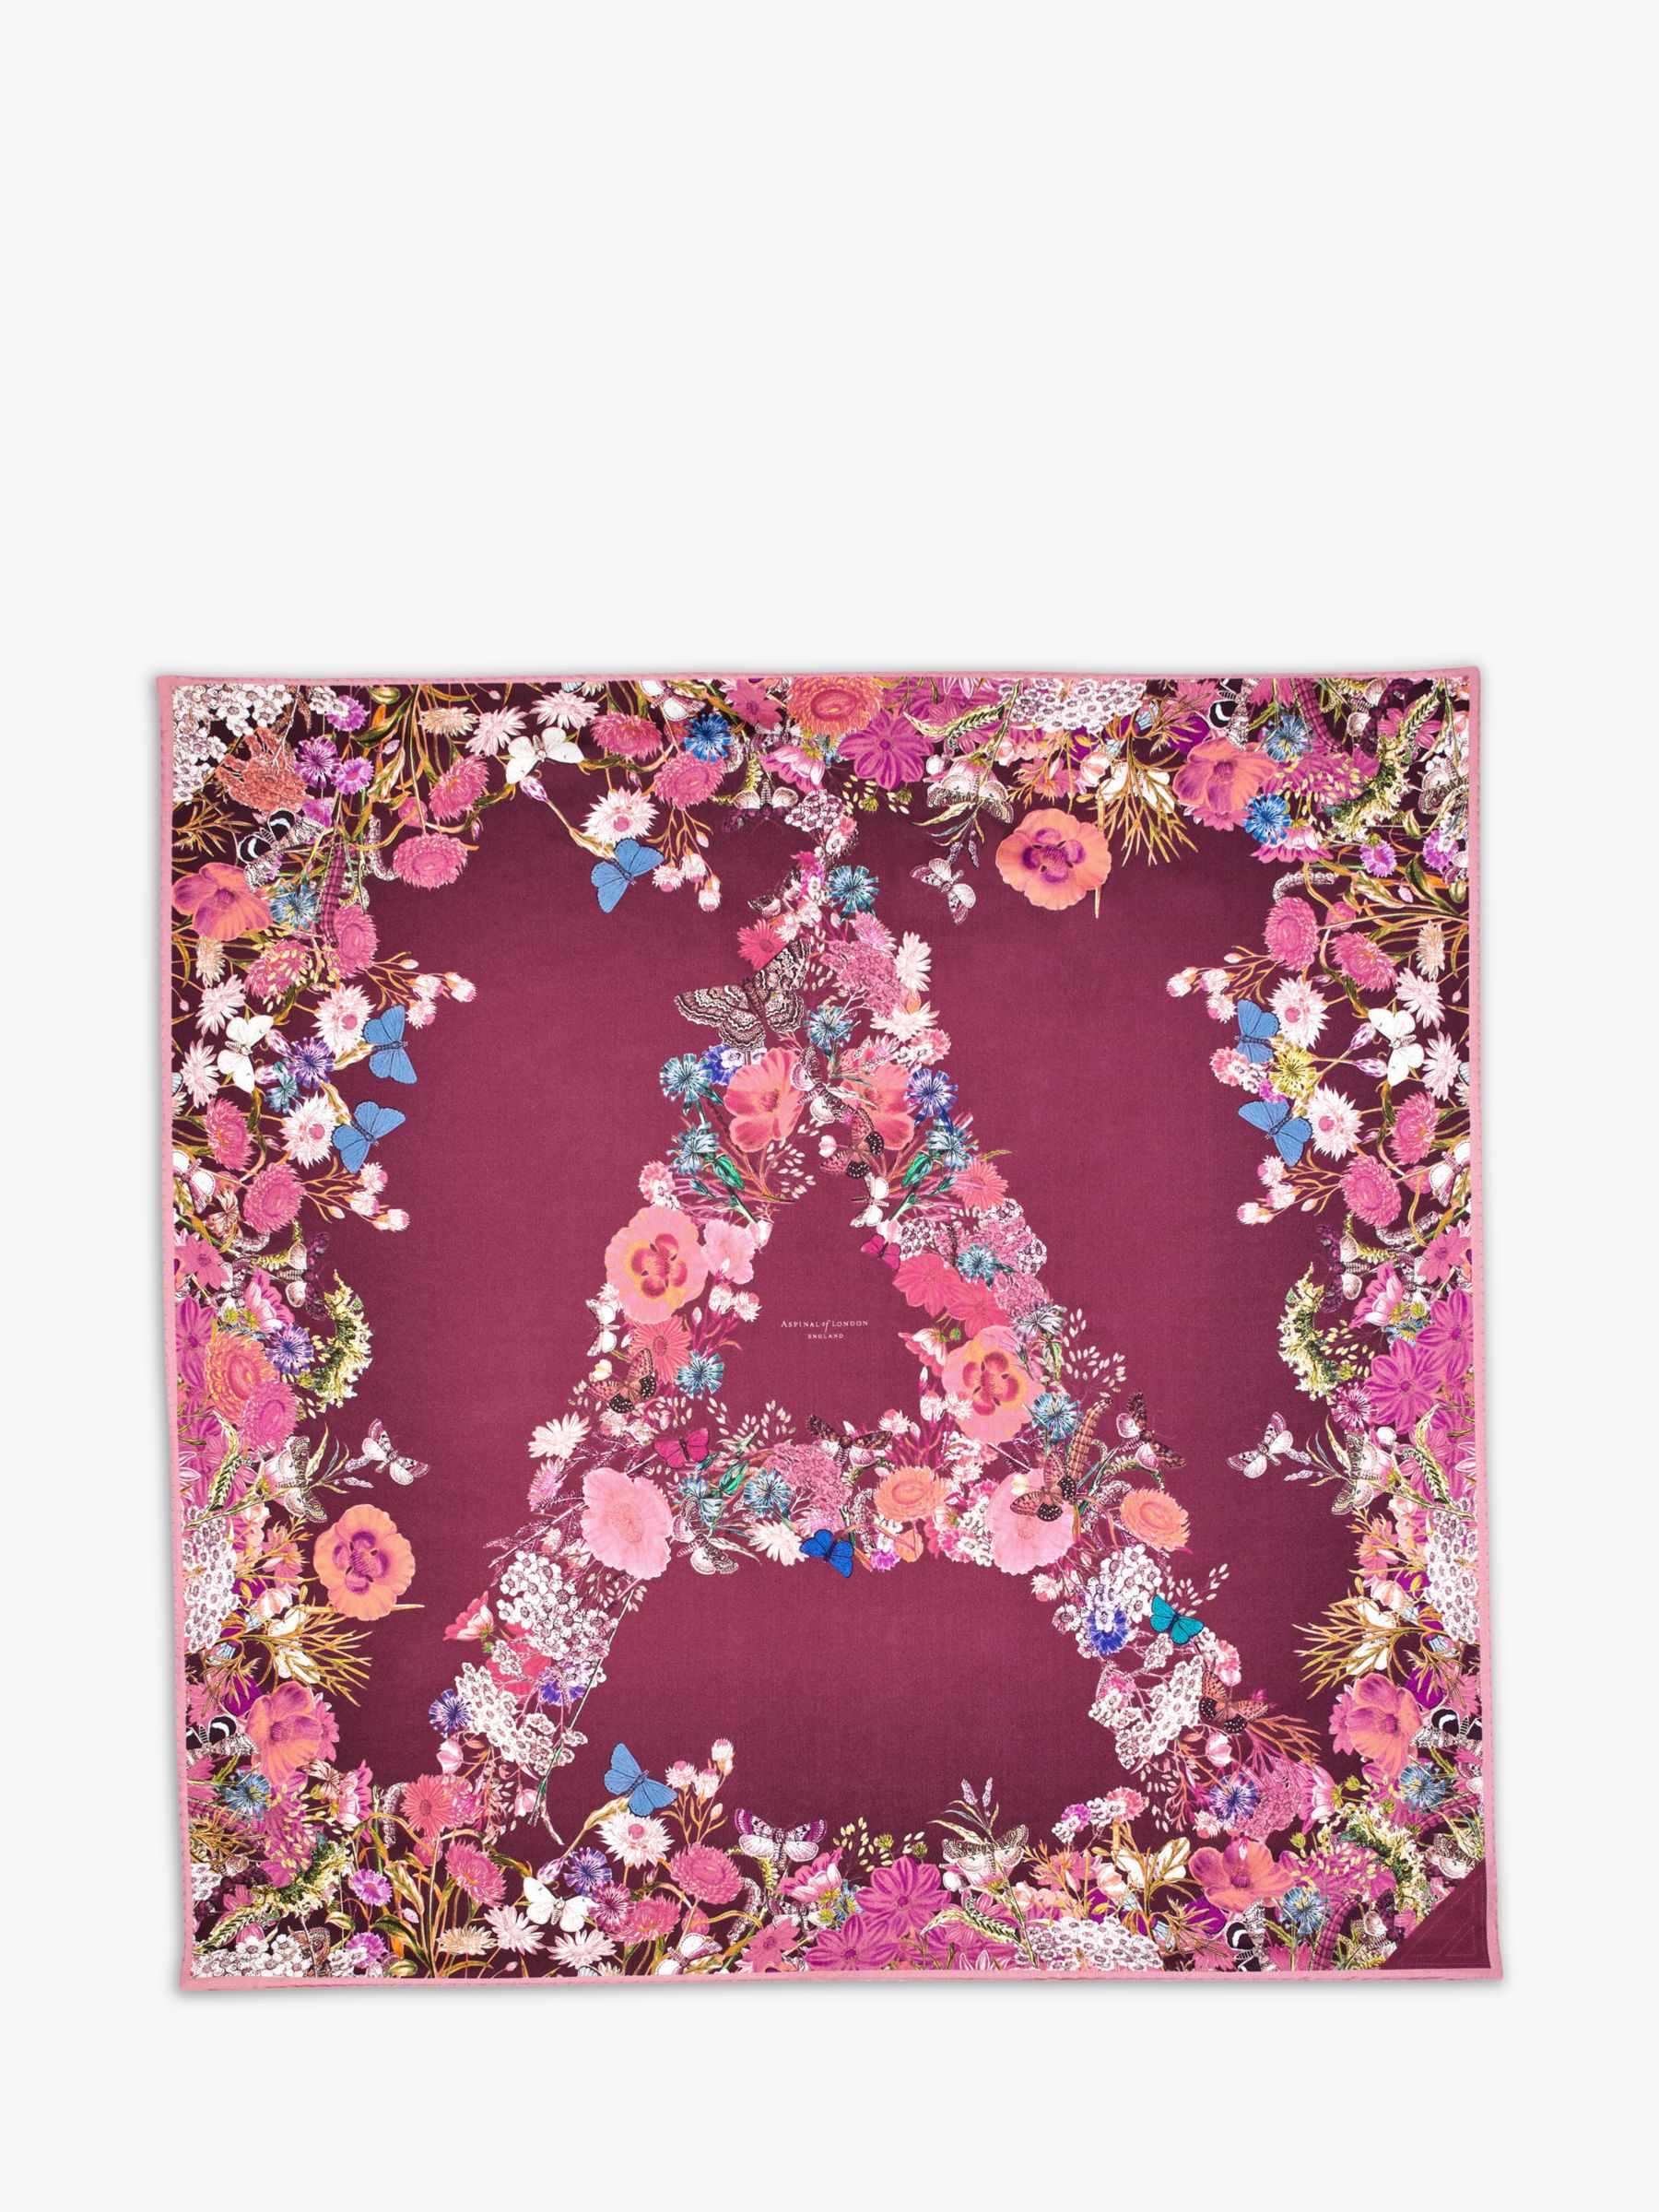 Aspinal of London Ombre A Floral Silk Square Scarf, Bordeaux